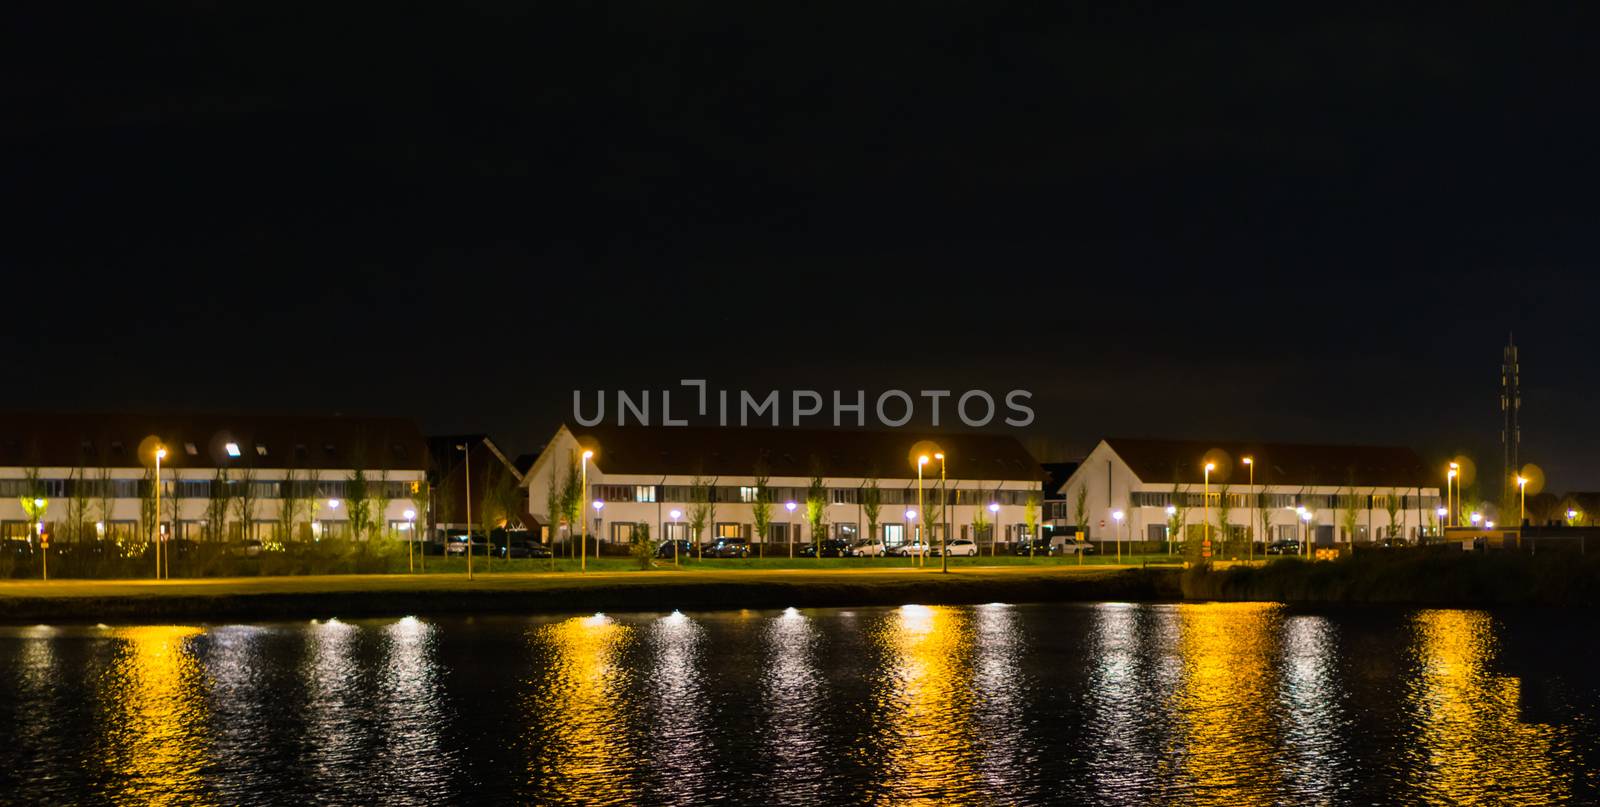 view from the water on houses and driving road at night time, dutch street view of landschapsbaan, the Meern, Utrecht the Netherlands